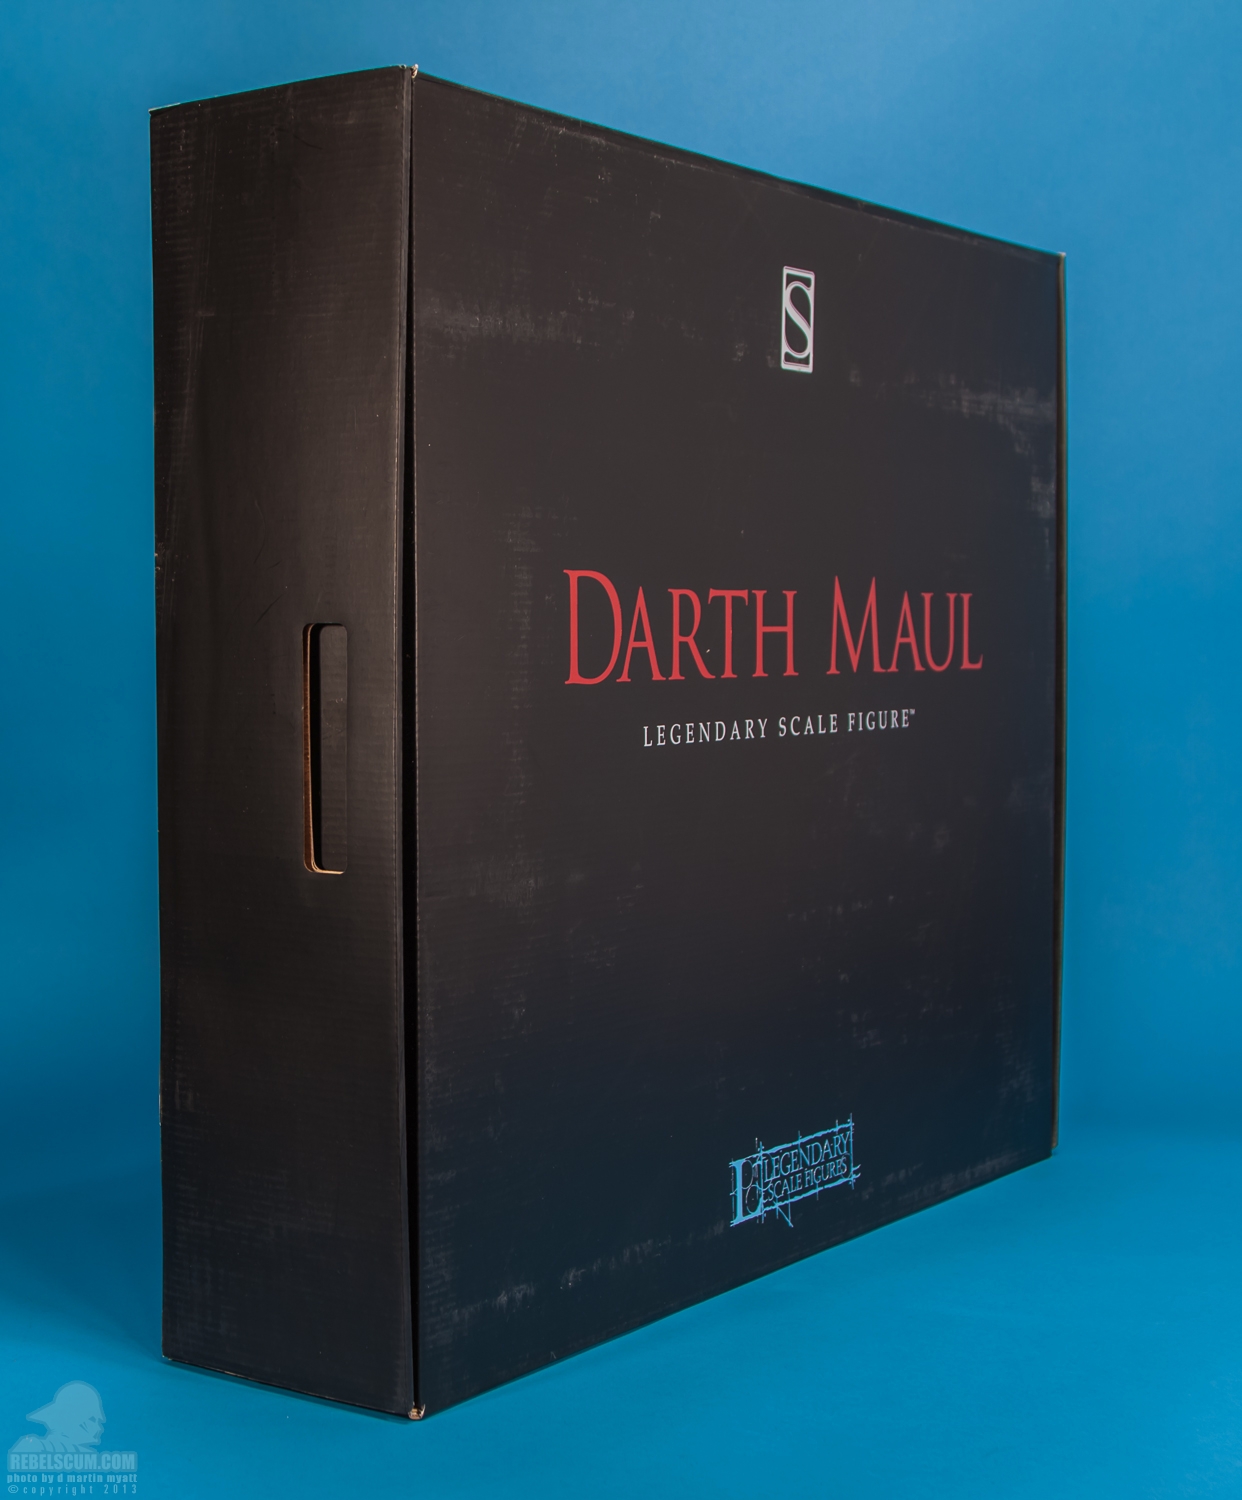 Darth_Maul_Legendary_Scale_Figure_Sideshow_Collectibles-34.jpg